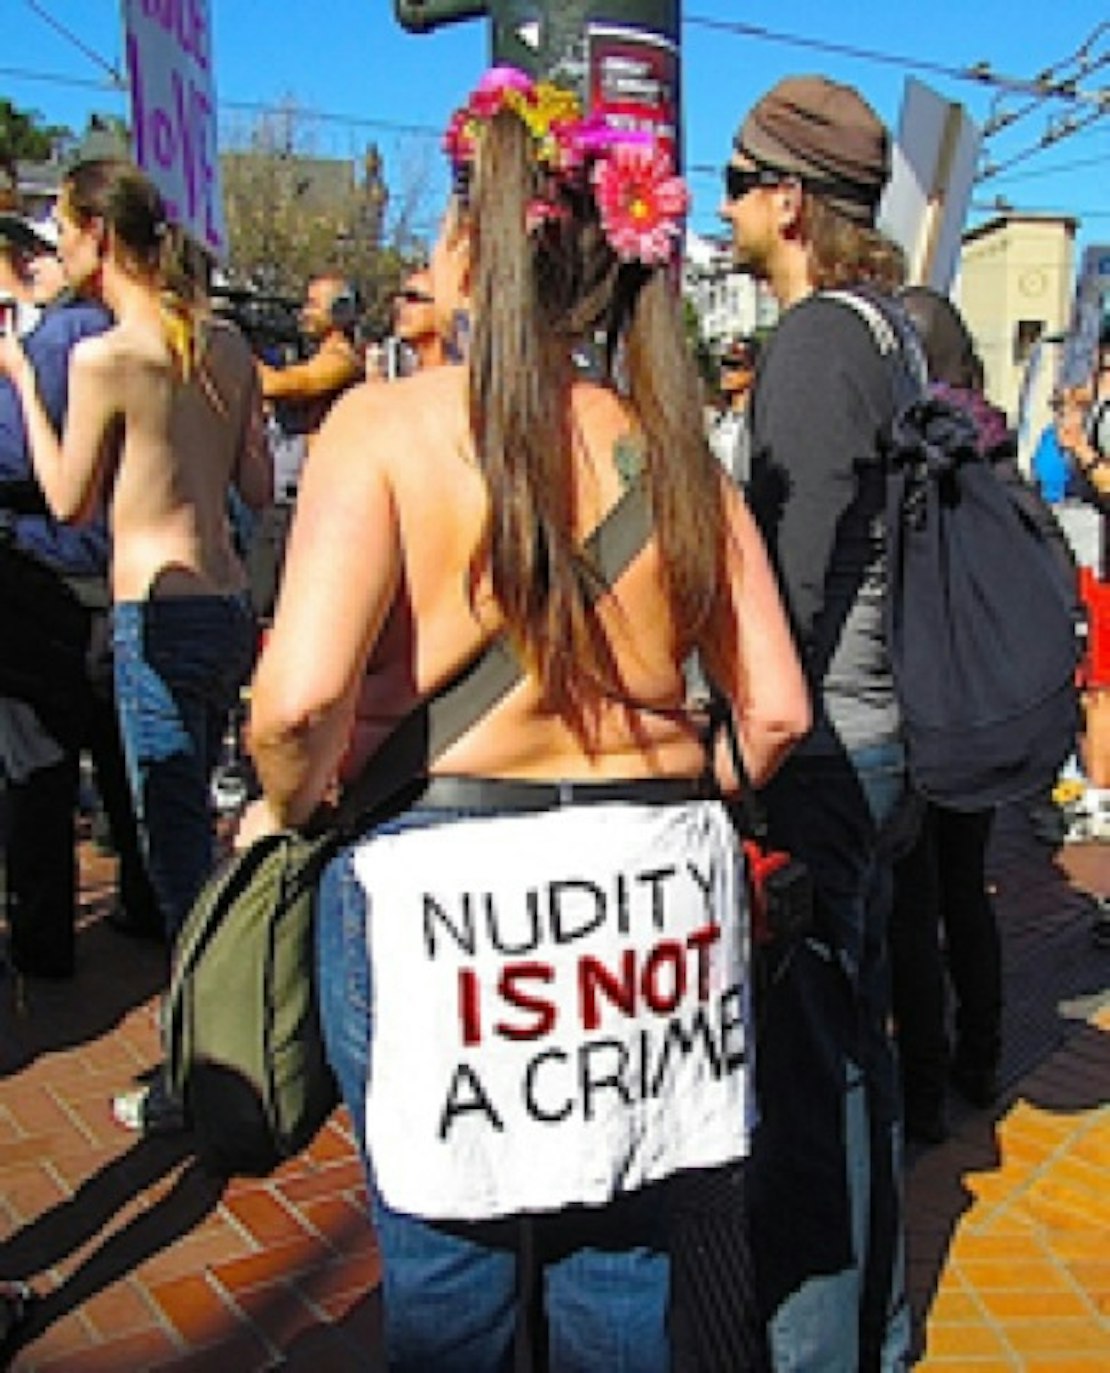 Nasty Nudist - Body Freedom Rally Ends In Police Force